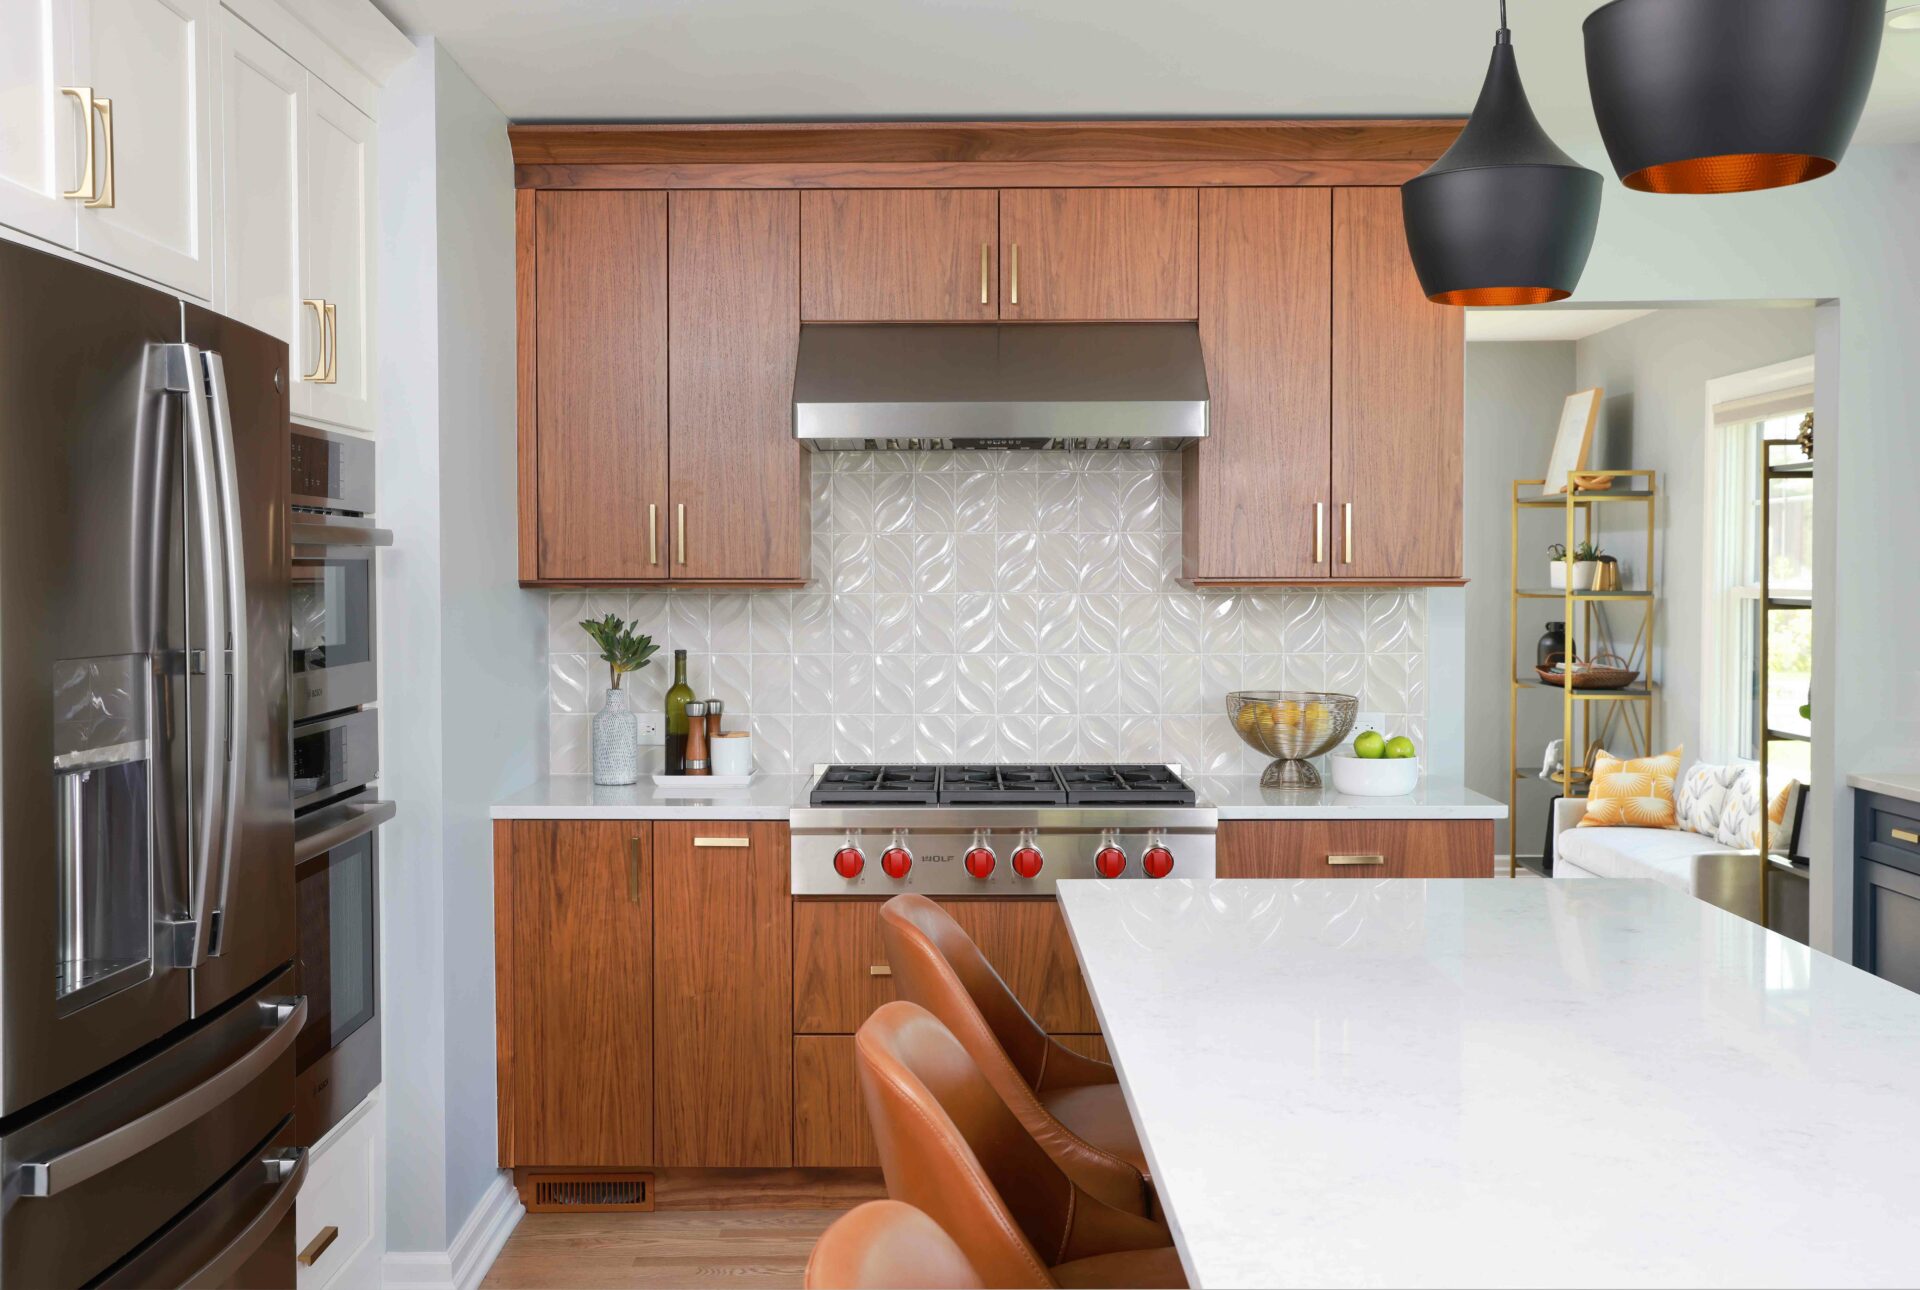 Walnut slab cabinets and shaker style white kitchen cabinets